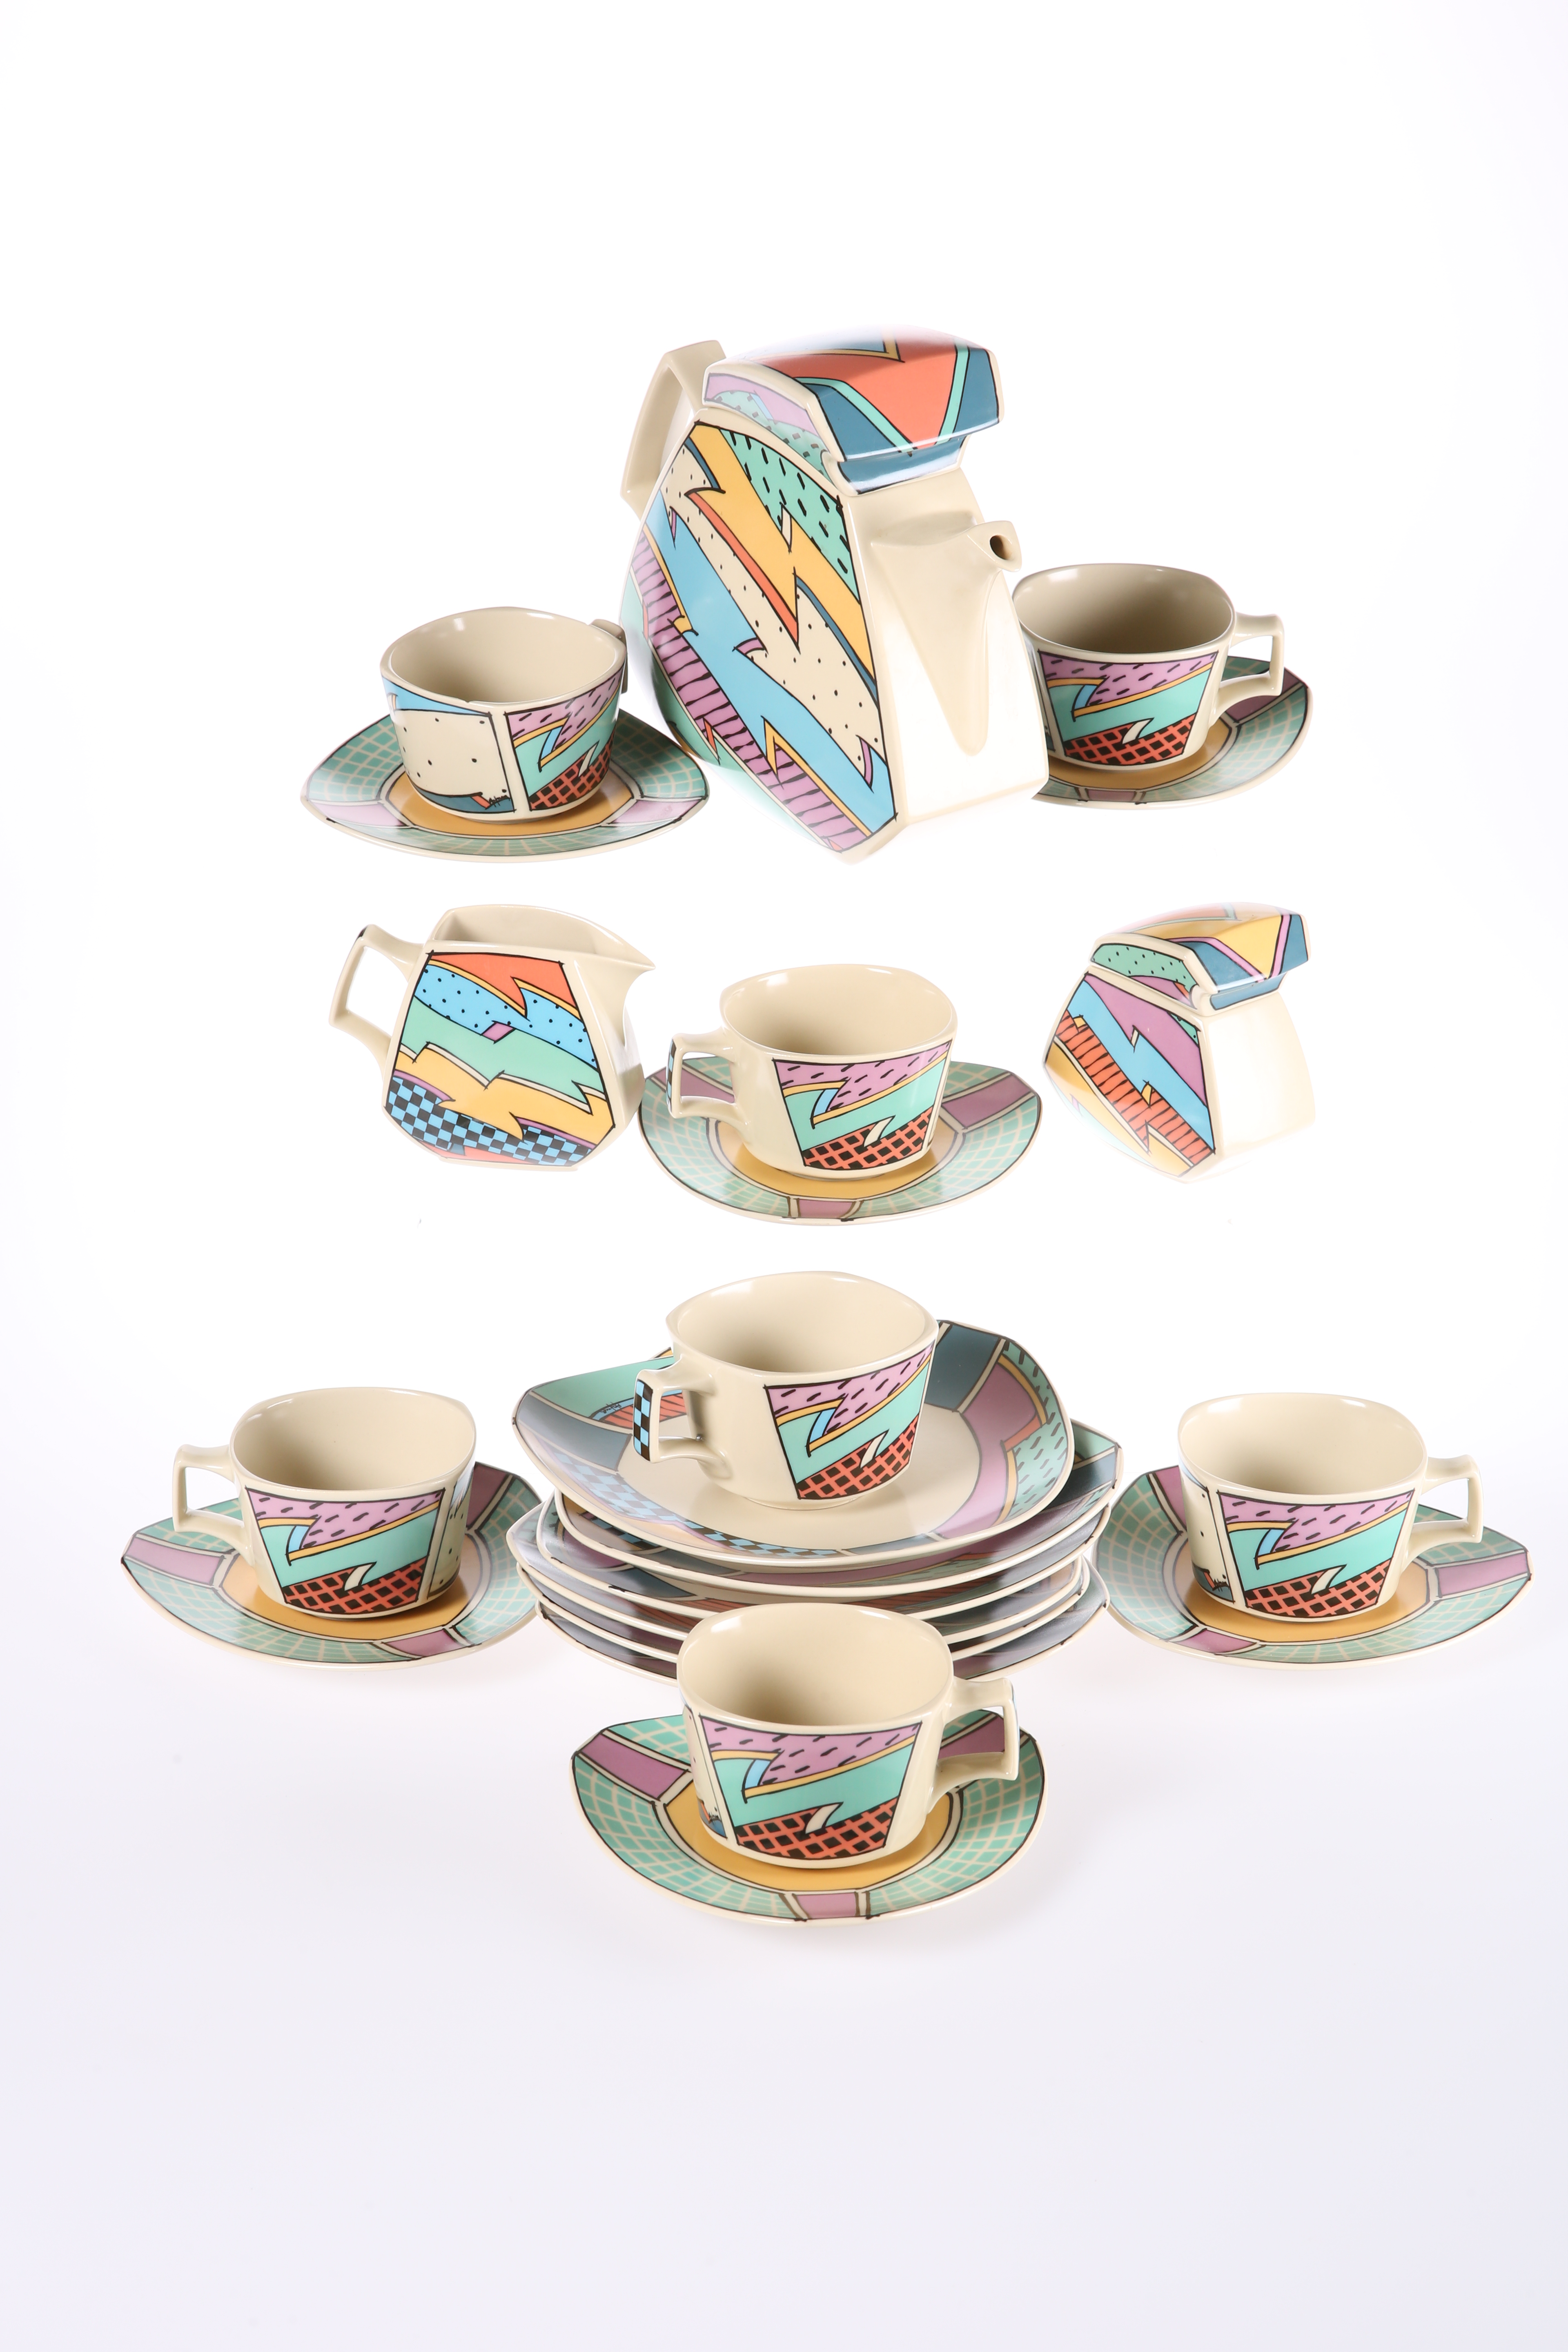 A ROSENTHAL STUDIO LINE TEA SERVICE IN THE "FLASH ONE" PATTERN